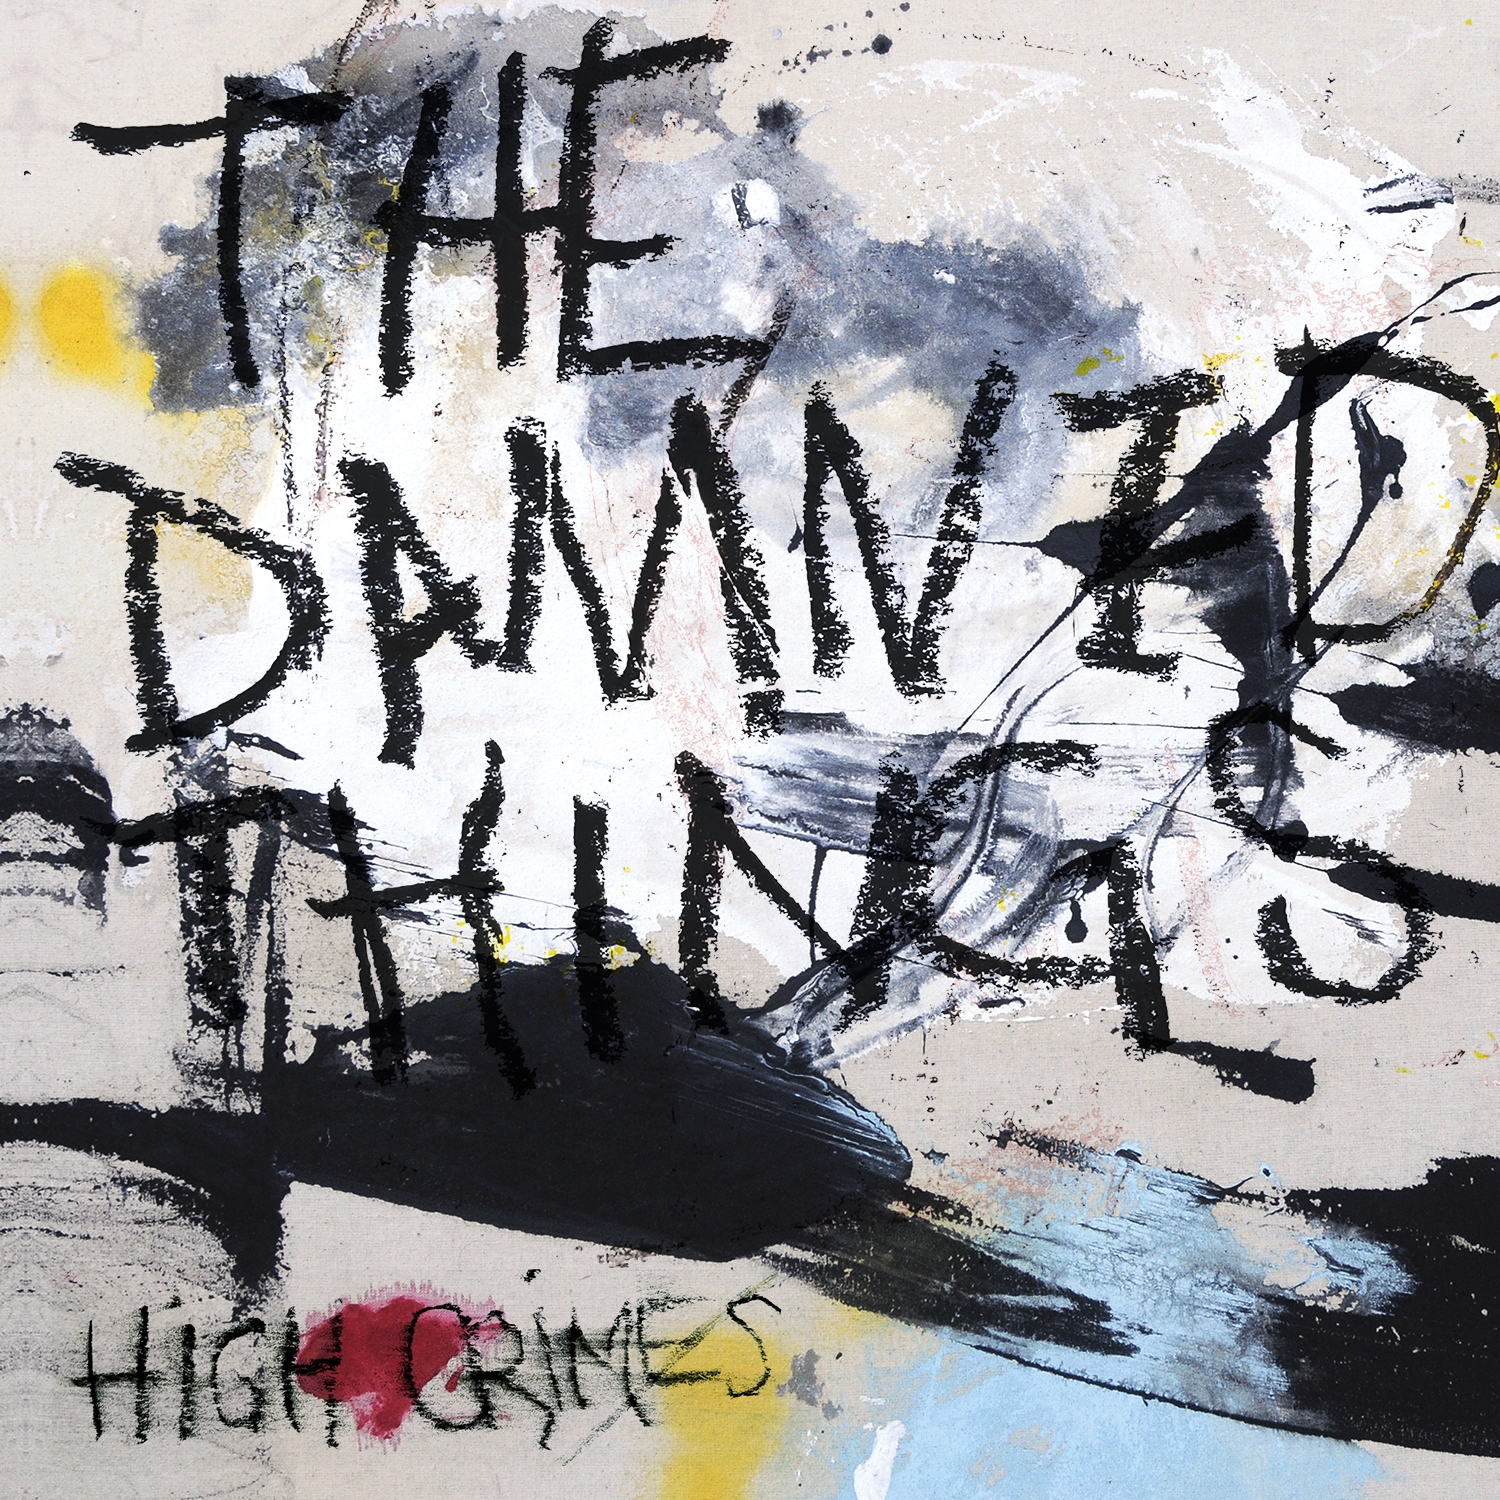 the-damned-things-high-crimes-kurswechsel-album-review